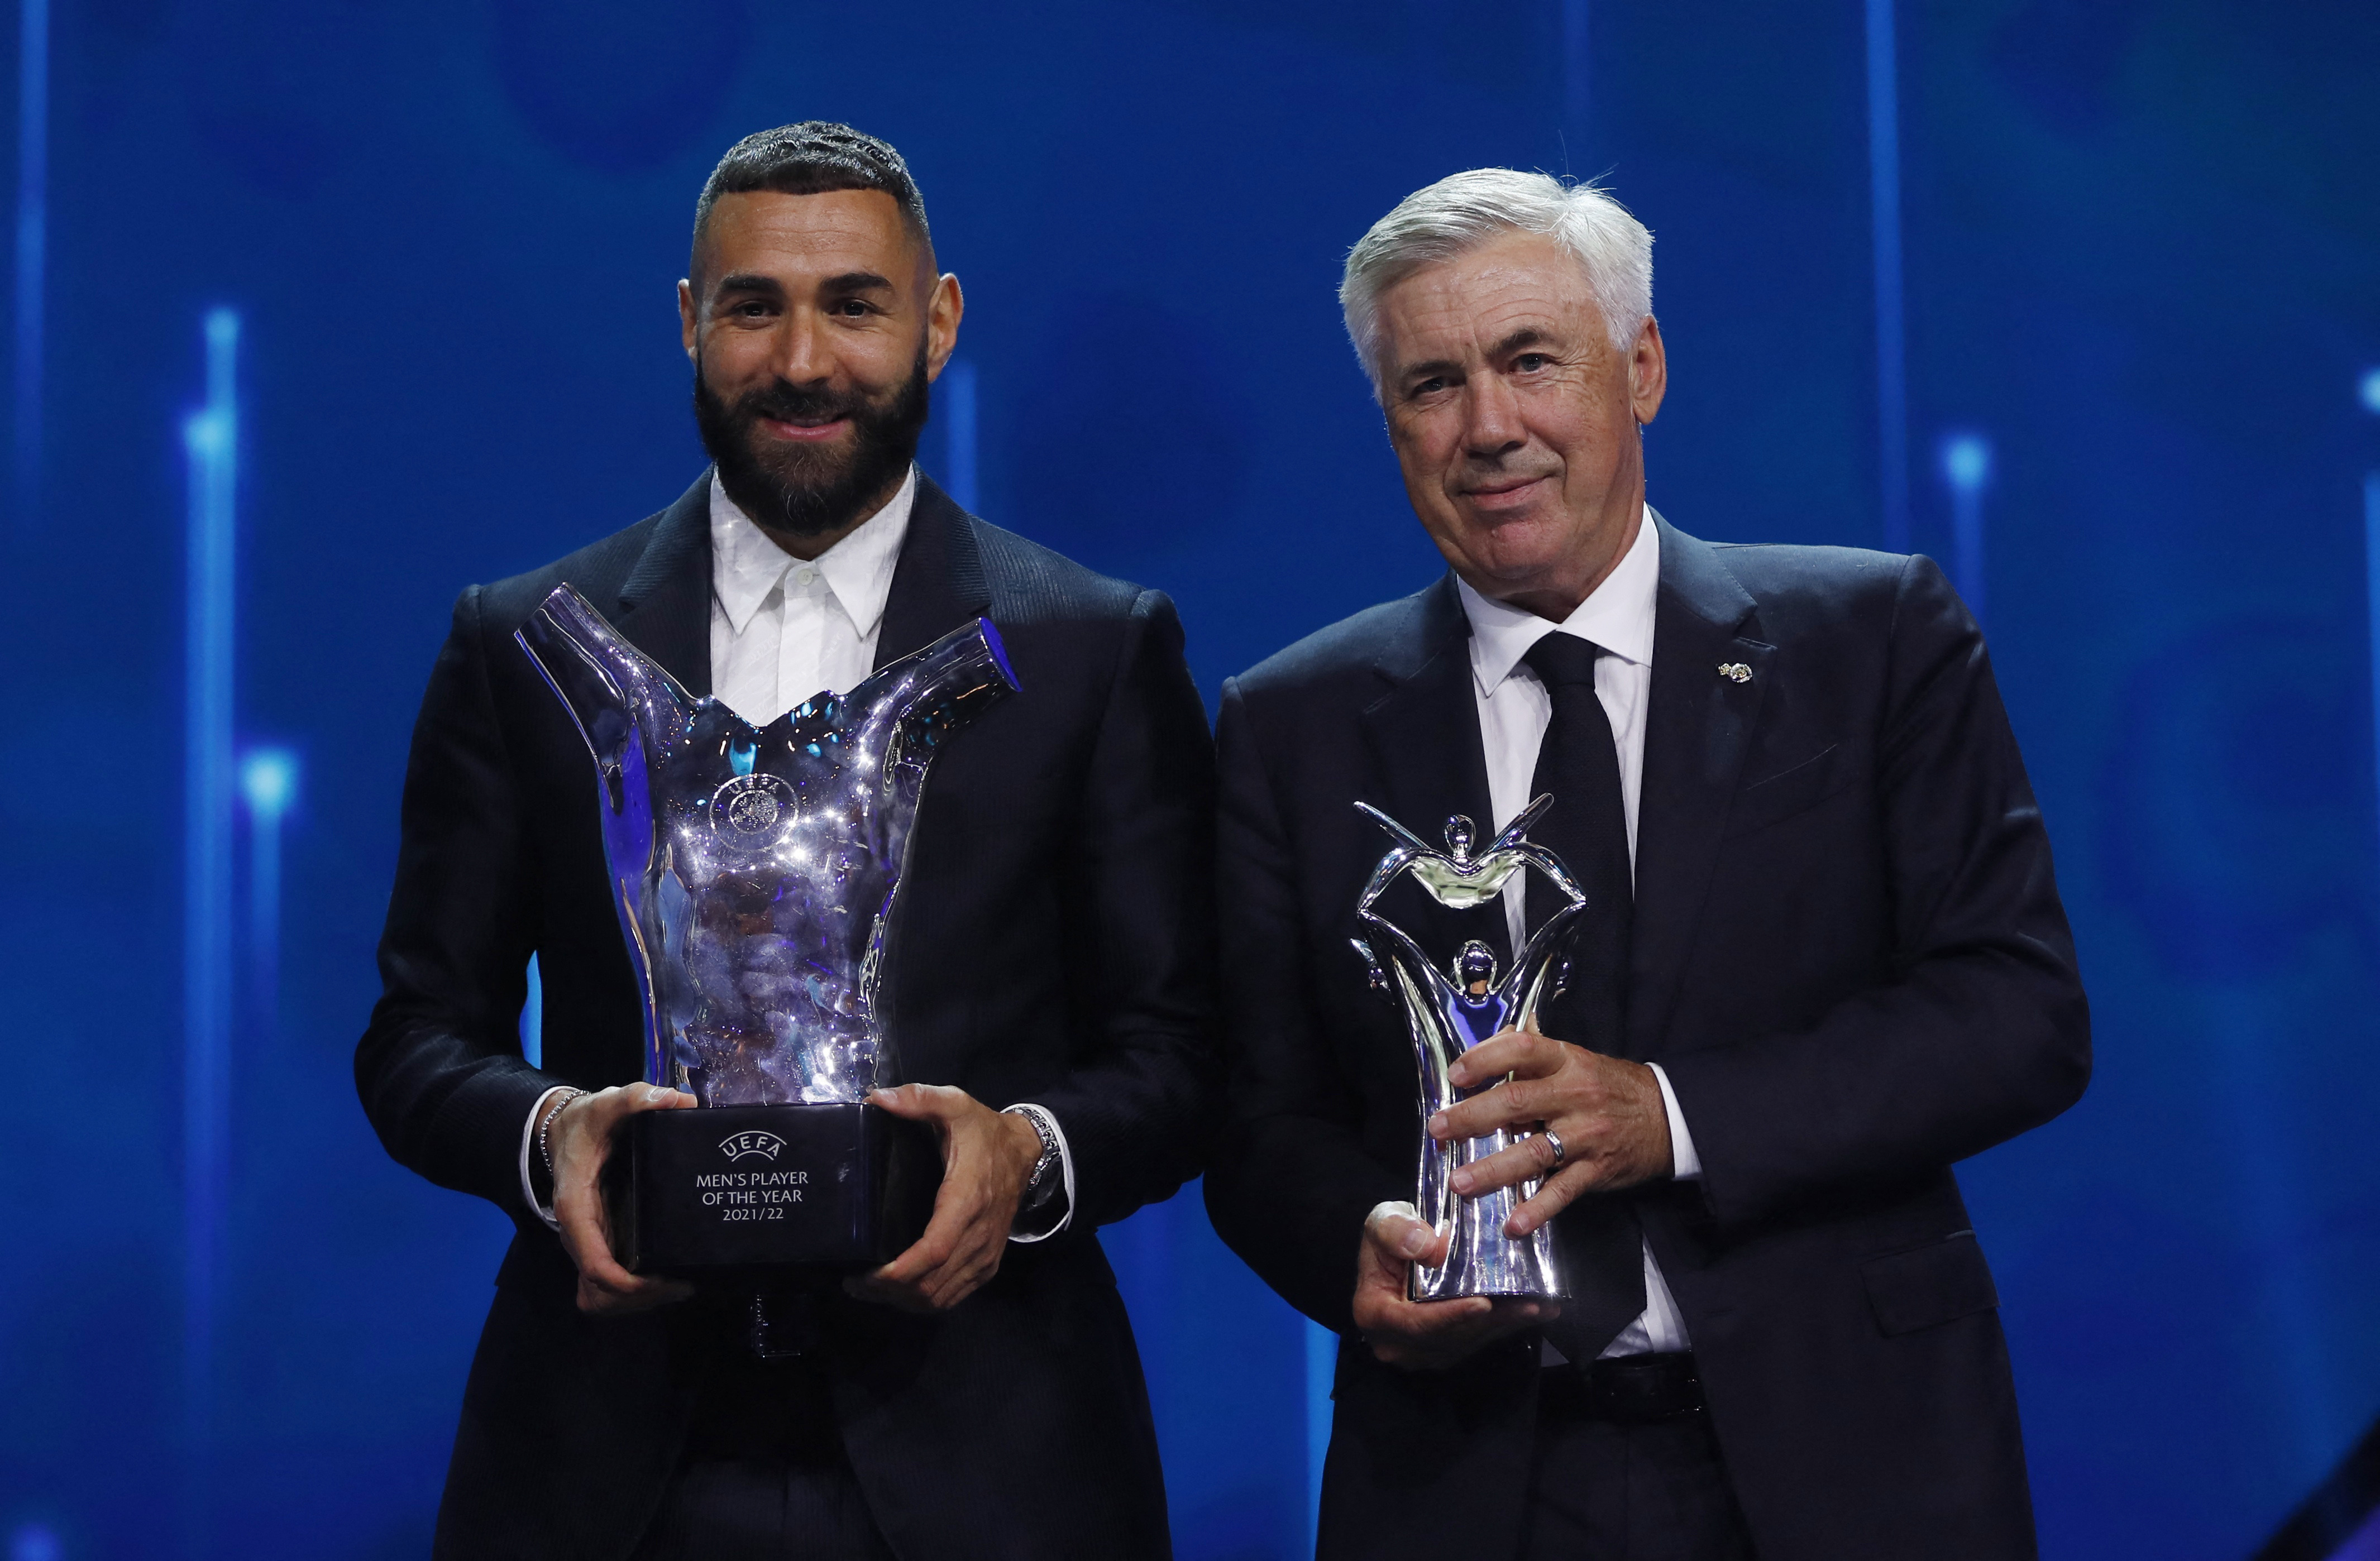 2021/22 UEFA Player and Coach of the Year Awards